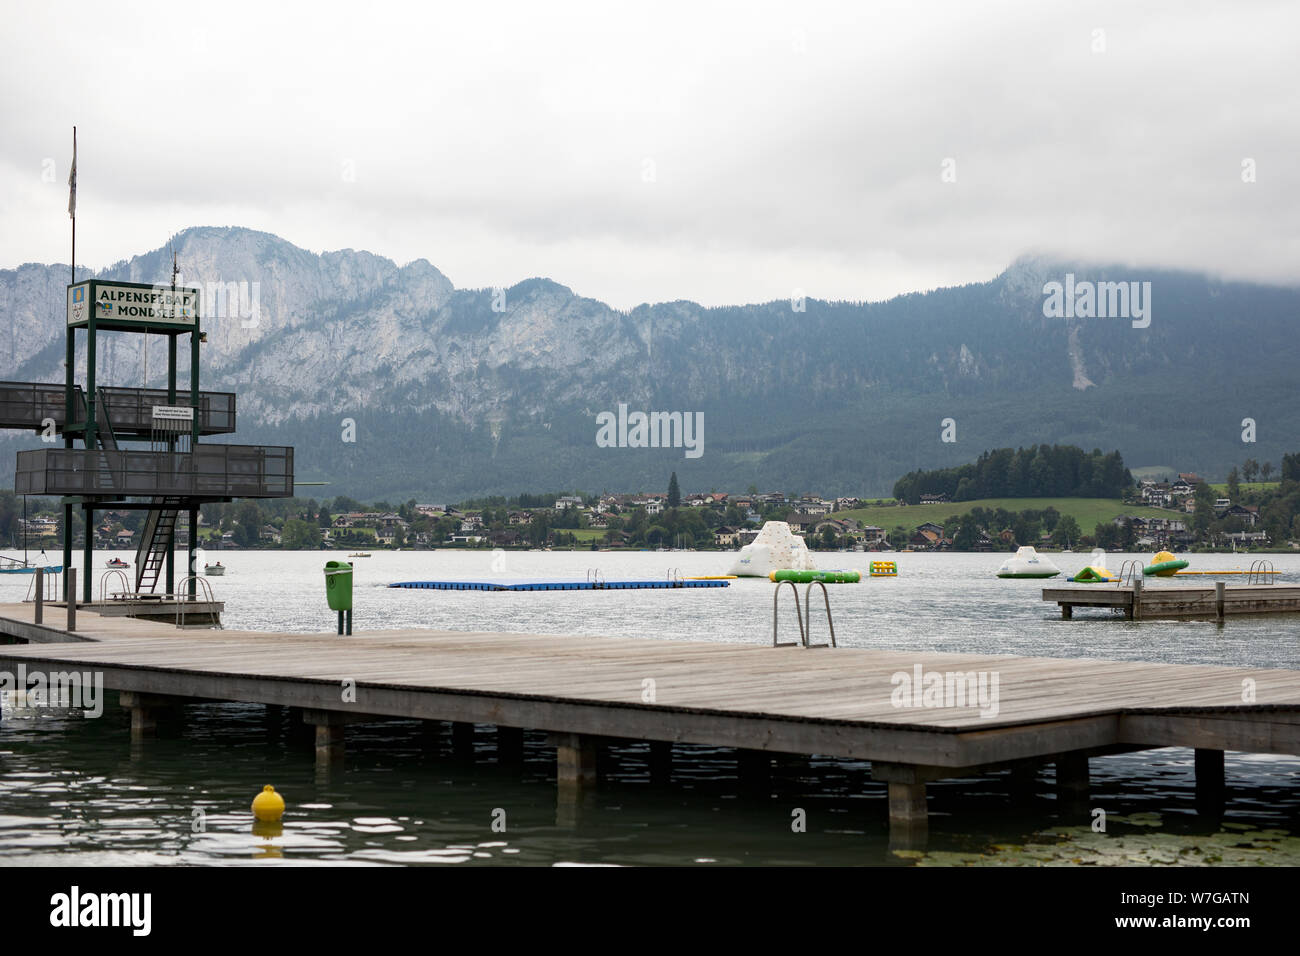 The dock with diving platform and swimming area at Alpenseebad in Mondsee, Austria, in the Alps on Mondsee lake. Stock Photo